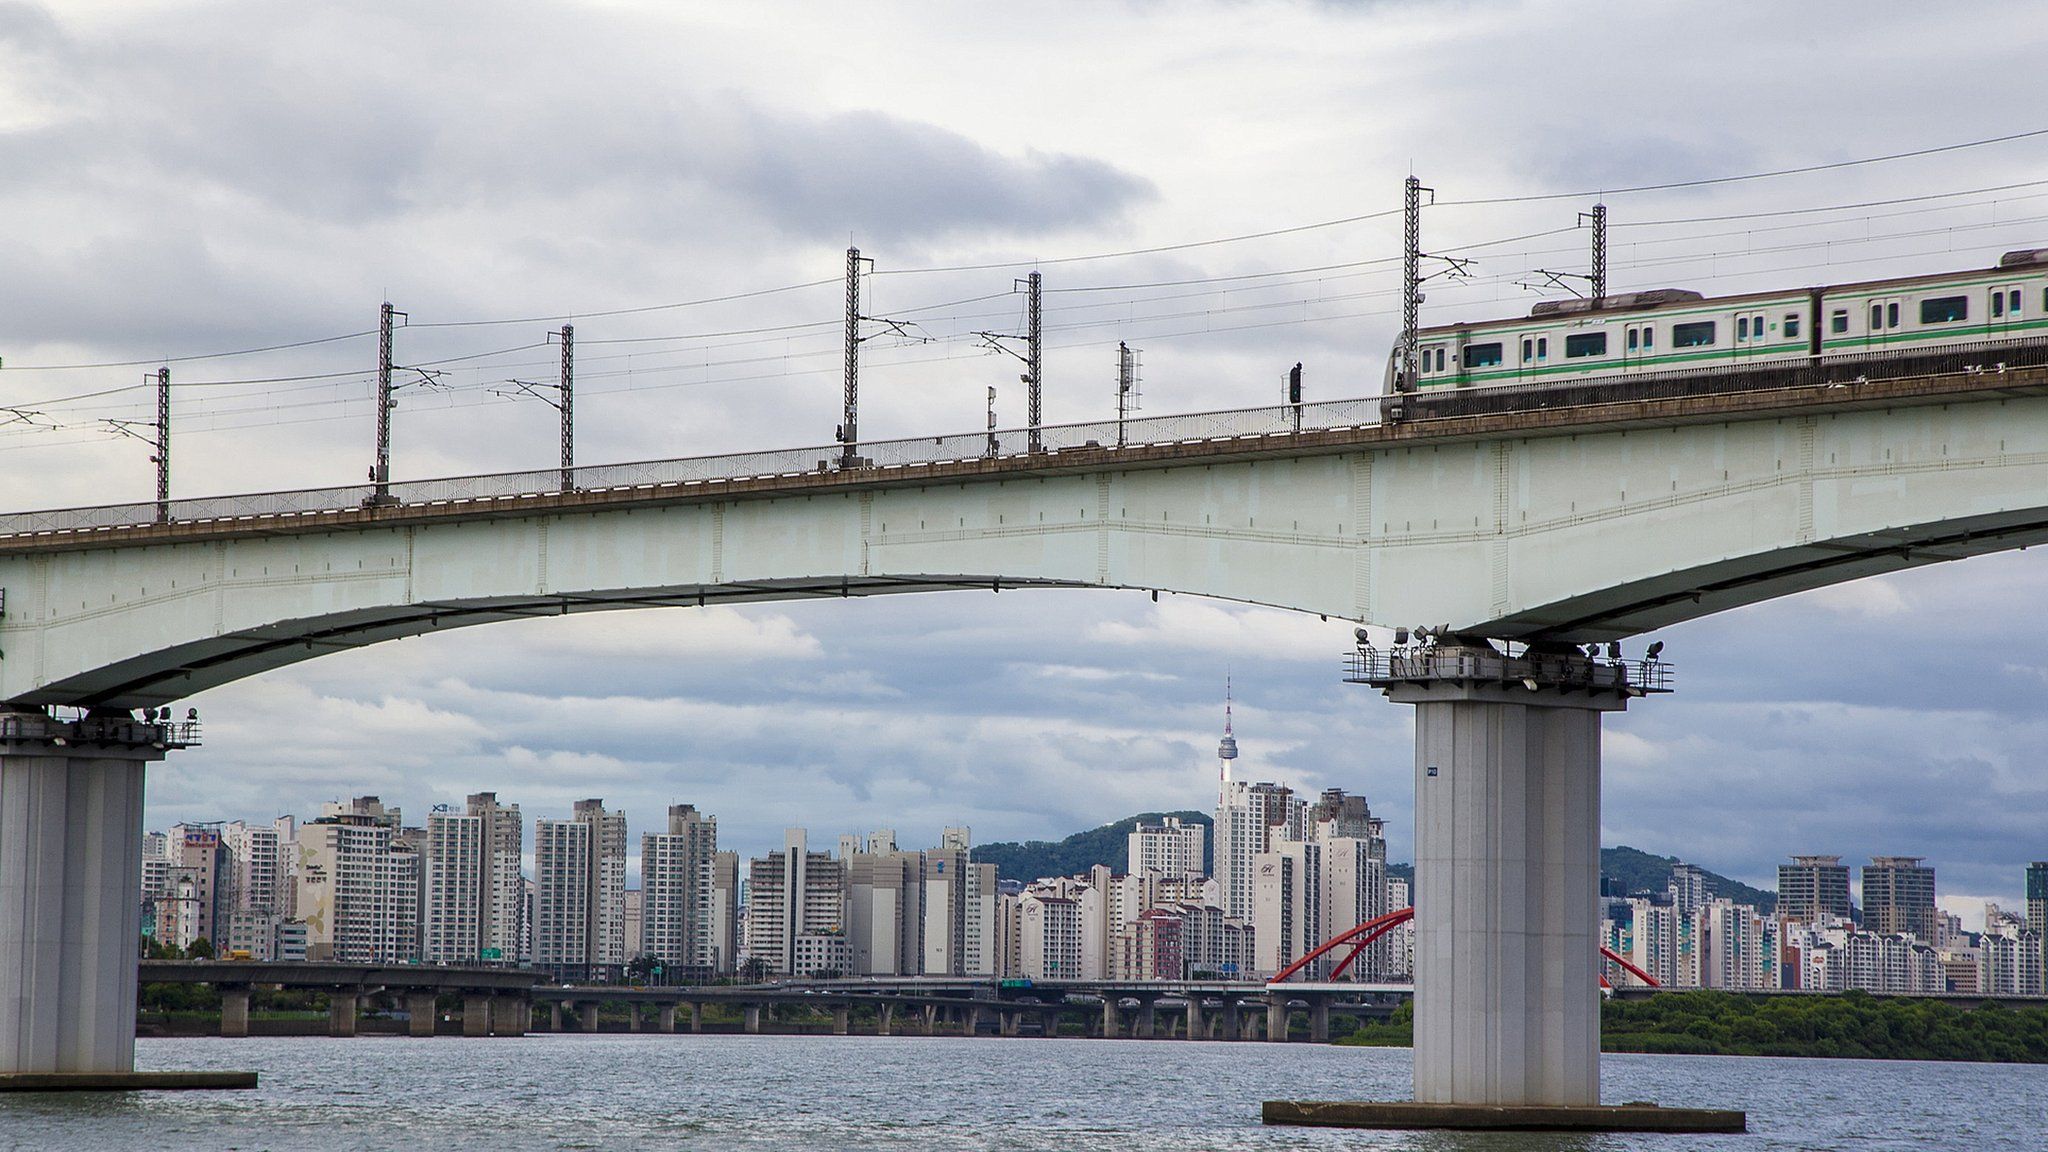 Train over the river Han in Seoul